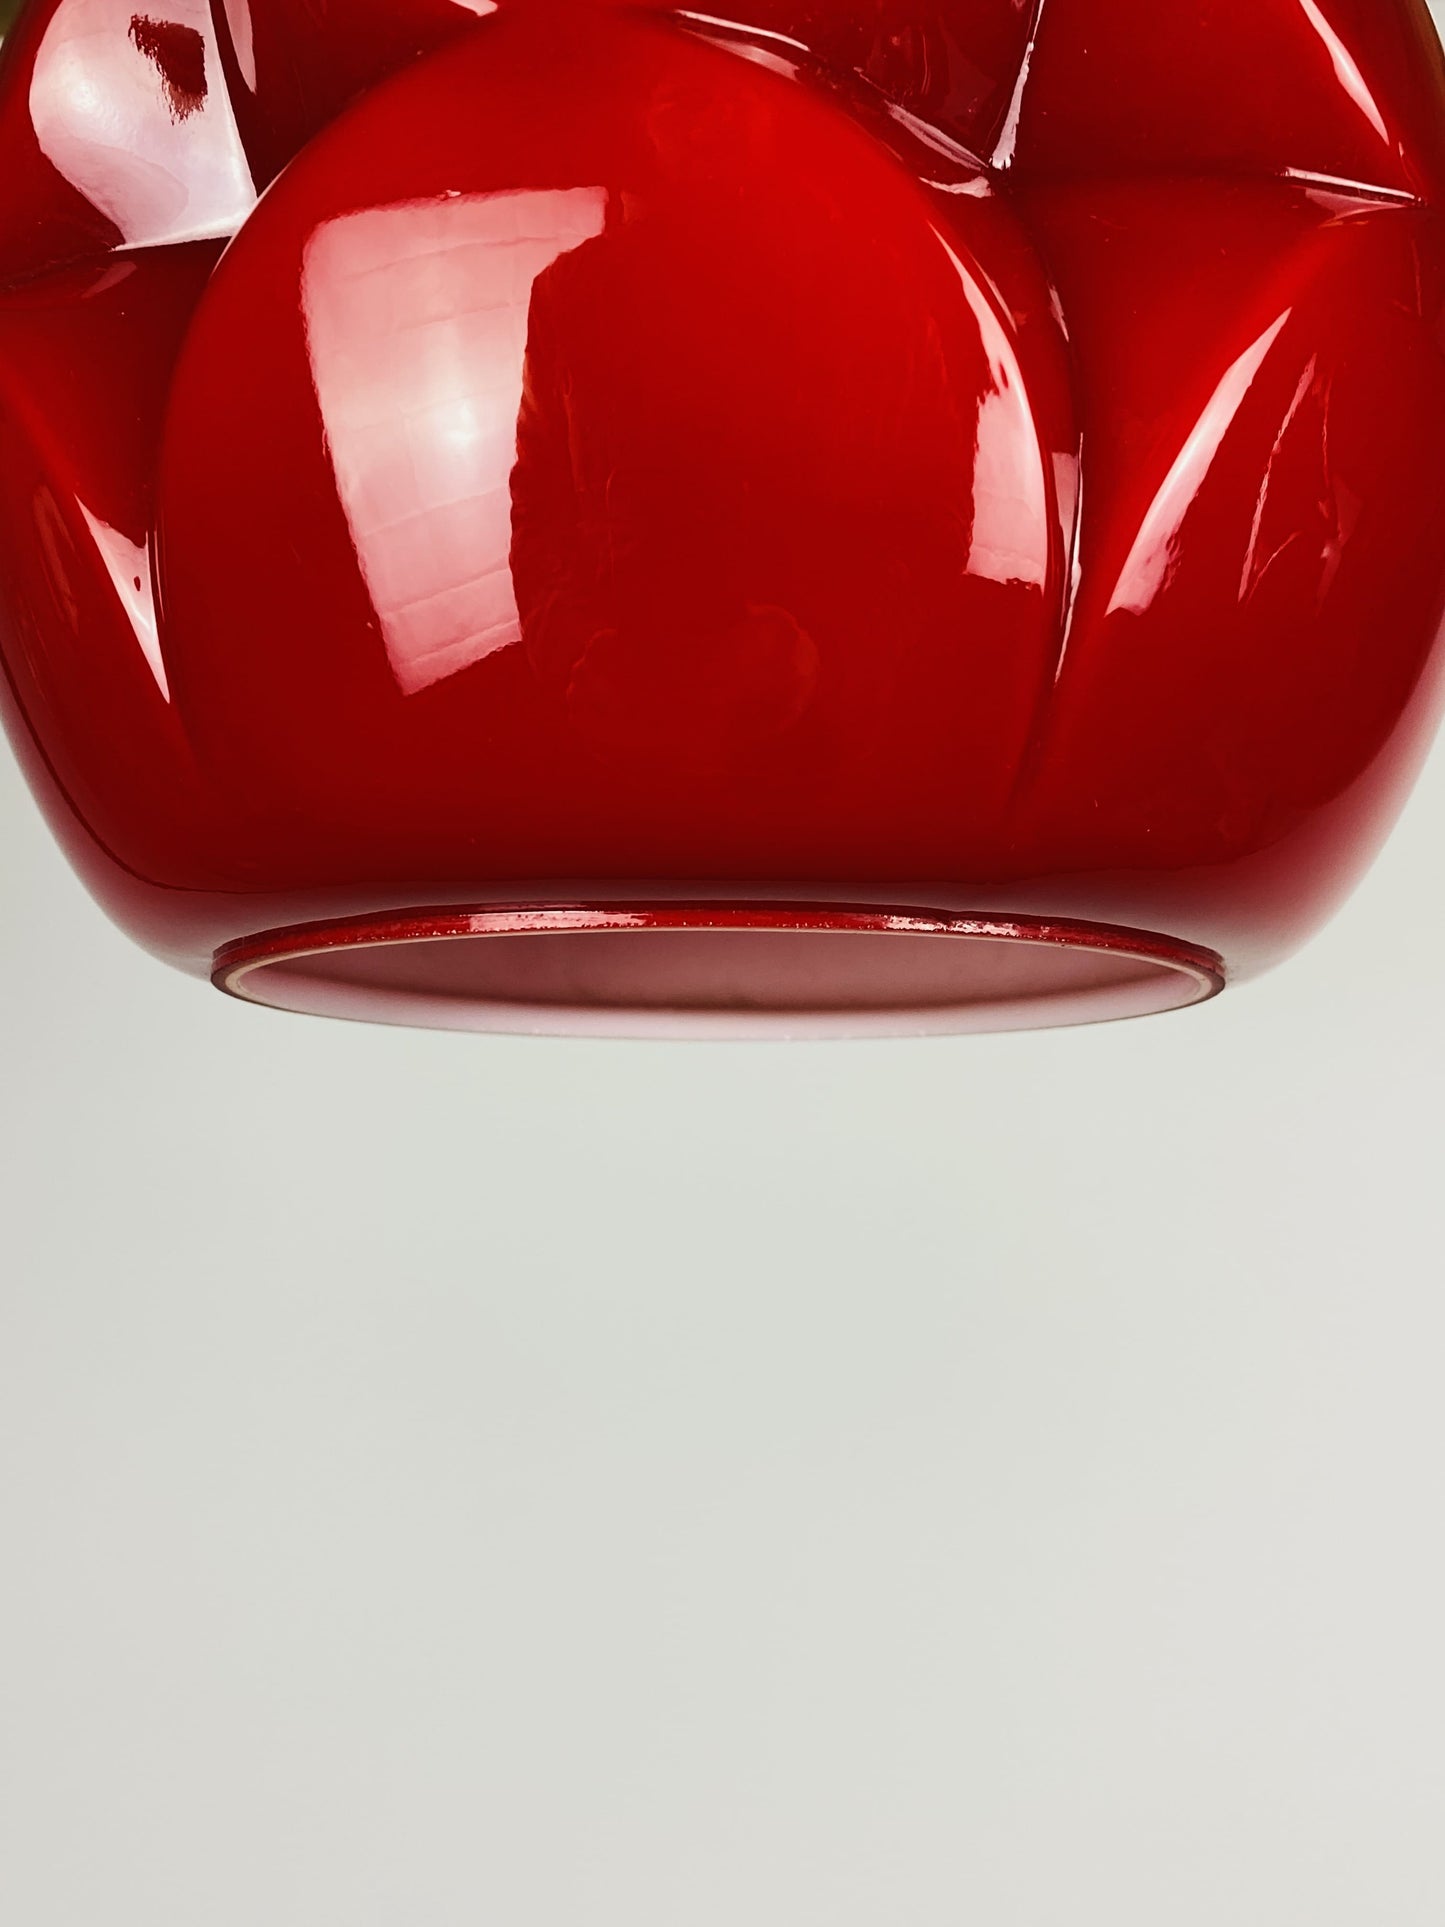 Pair of red glass artichoke pendant lights by Peill and Putzler 1960